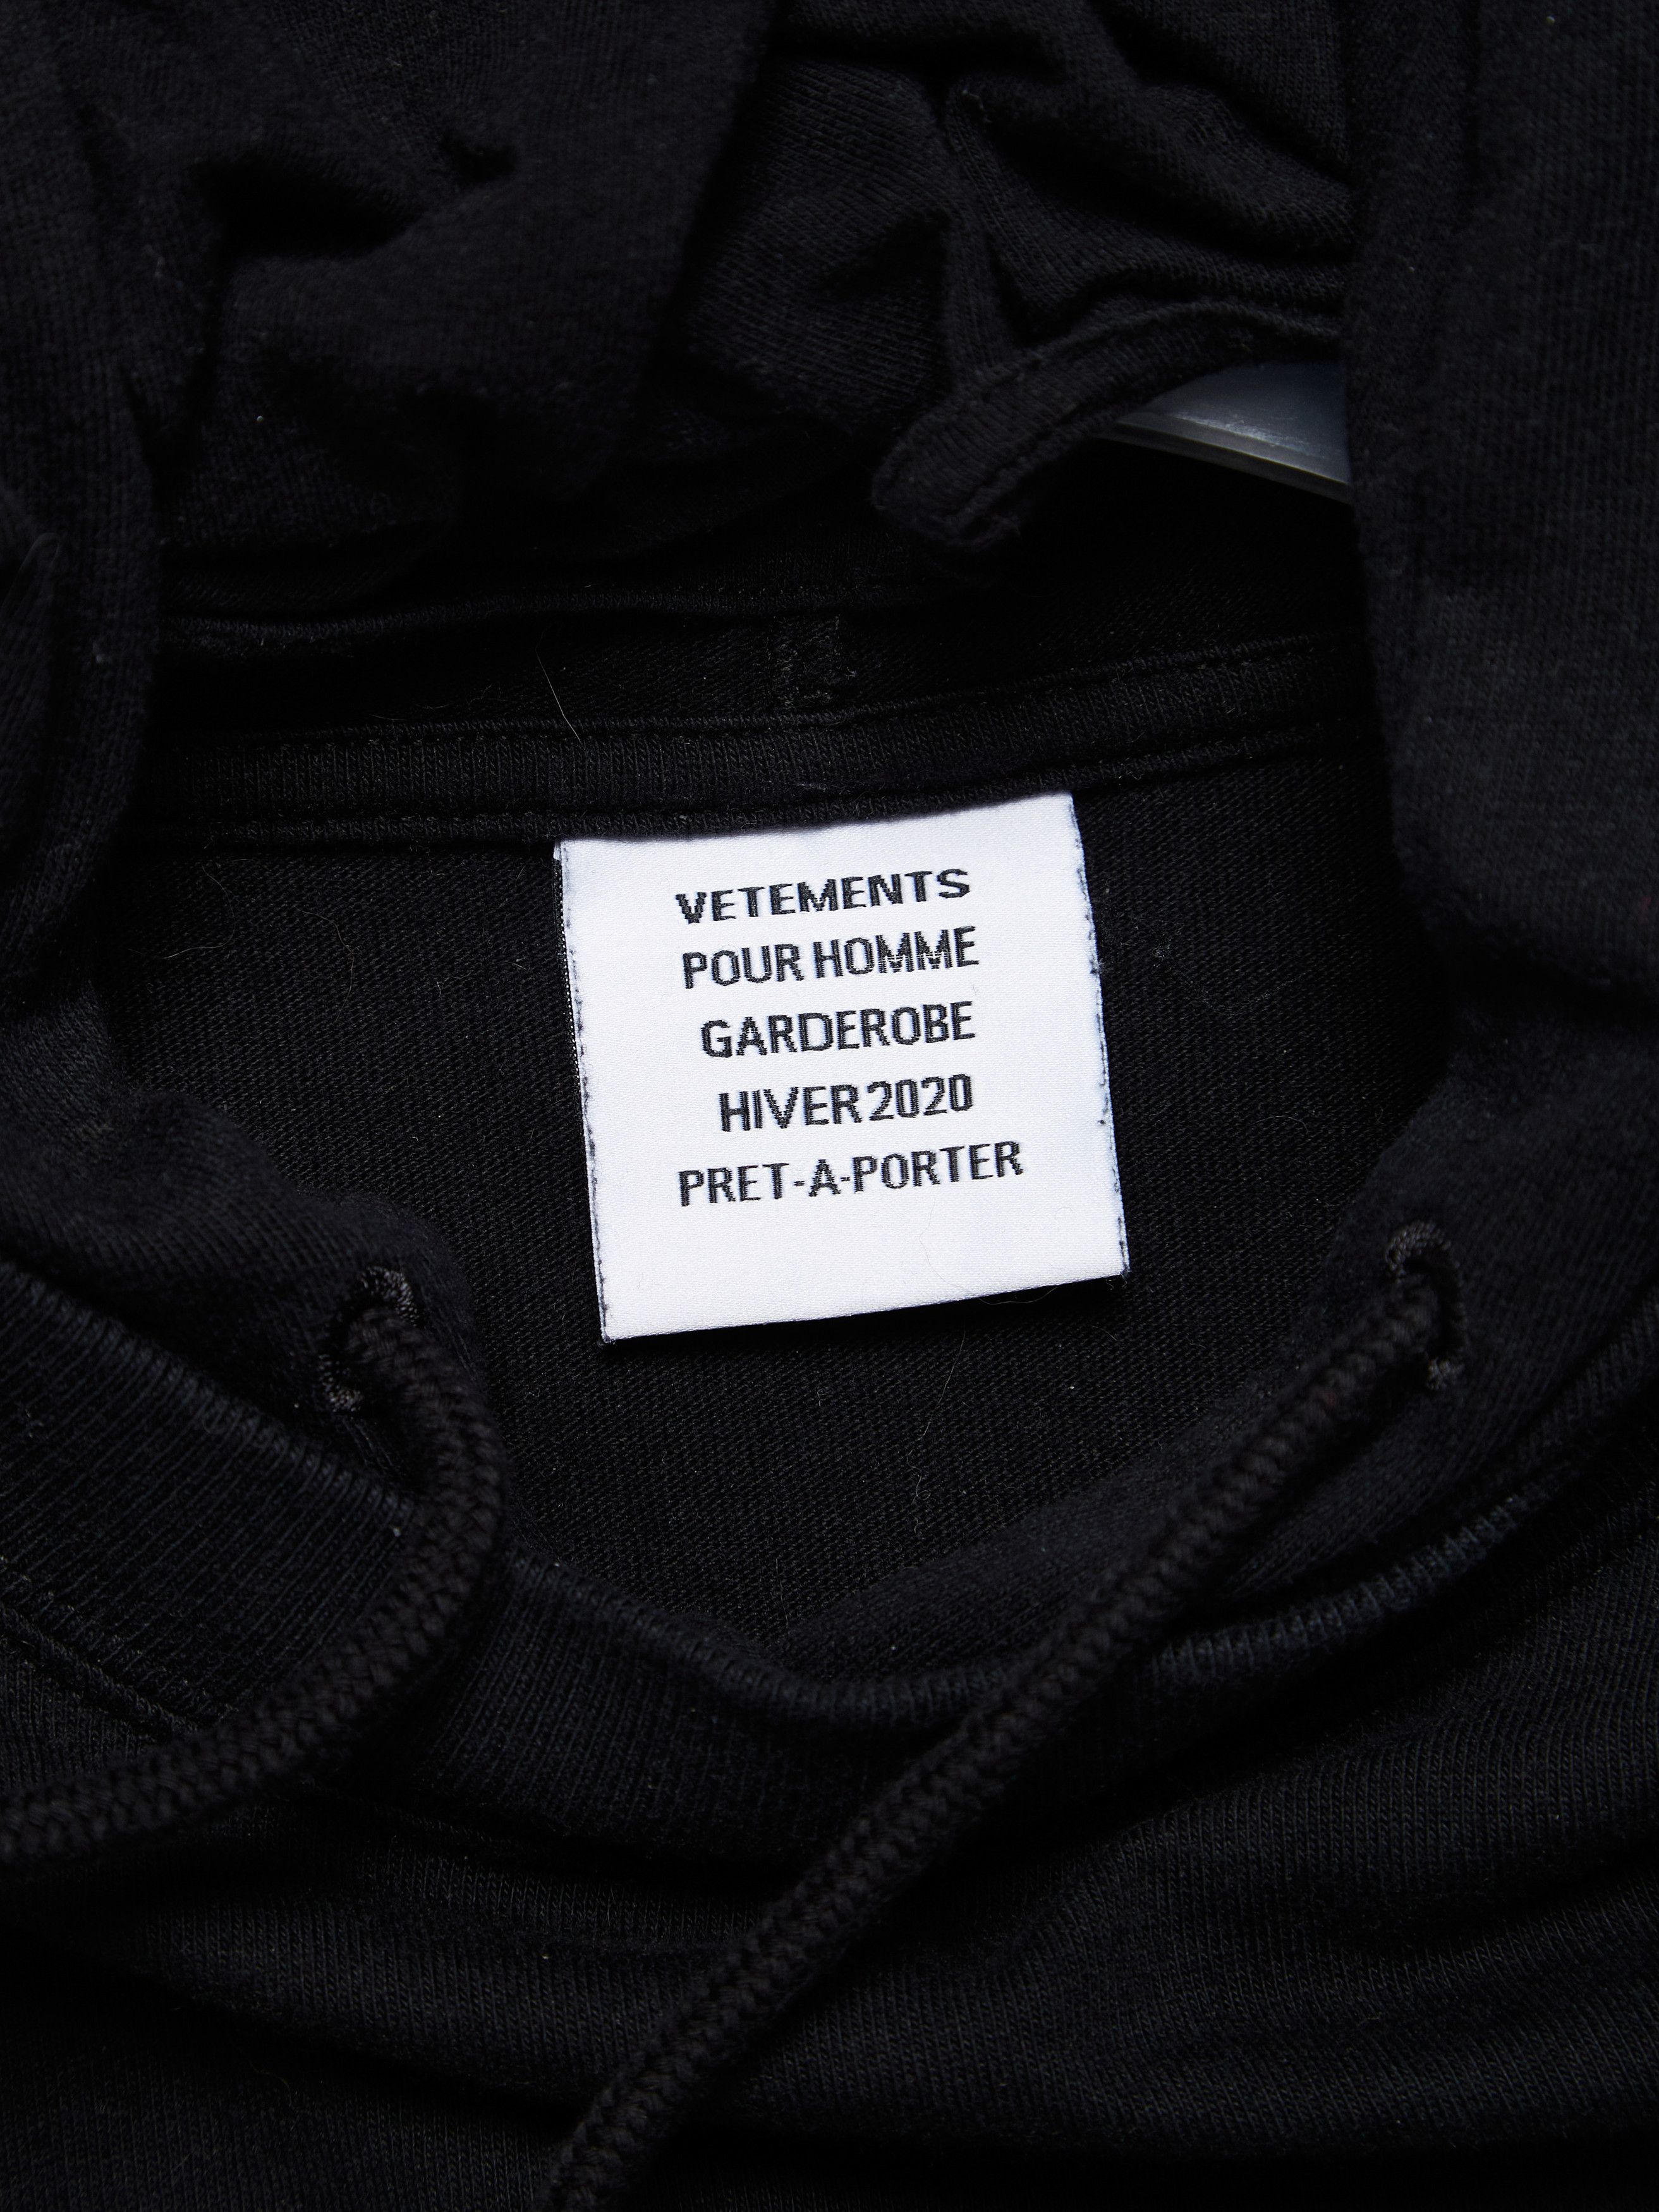 Vetements AW20 The President Black Jersey Hoodie Size US M / EU 48-50 / 2 - 8 Preview